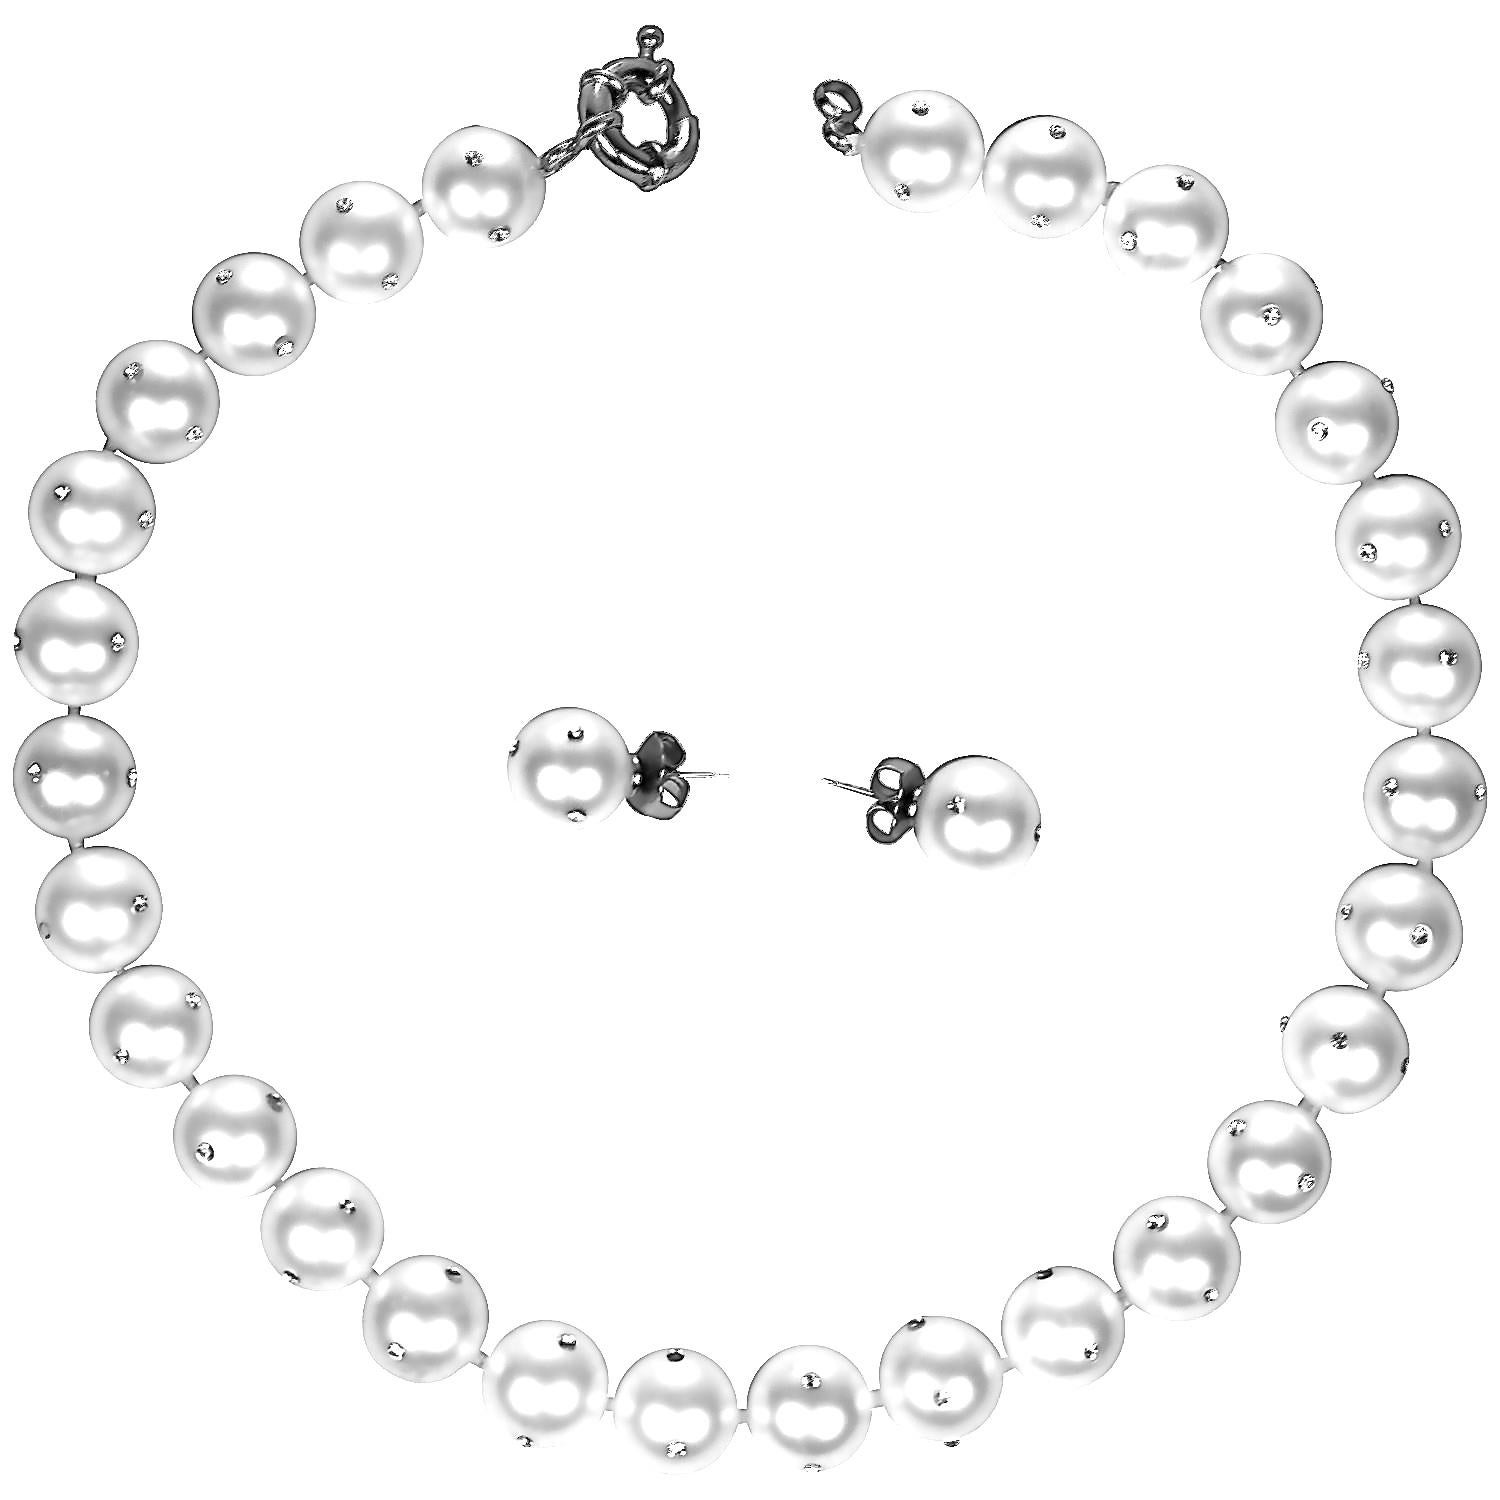 For a Jacqueline Kennedy Sophisticated Fashionista!

A Gorgeous unique 14-16 mm faux pearl (29 pearls on necklace) with inlay of sparkly cz diamonds, spaced around each pearl both the necklace and earrings. Necklace with silver spring ring clasp and